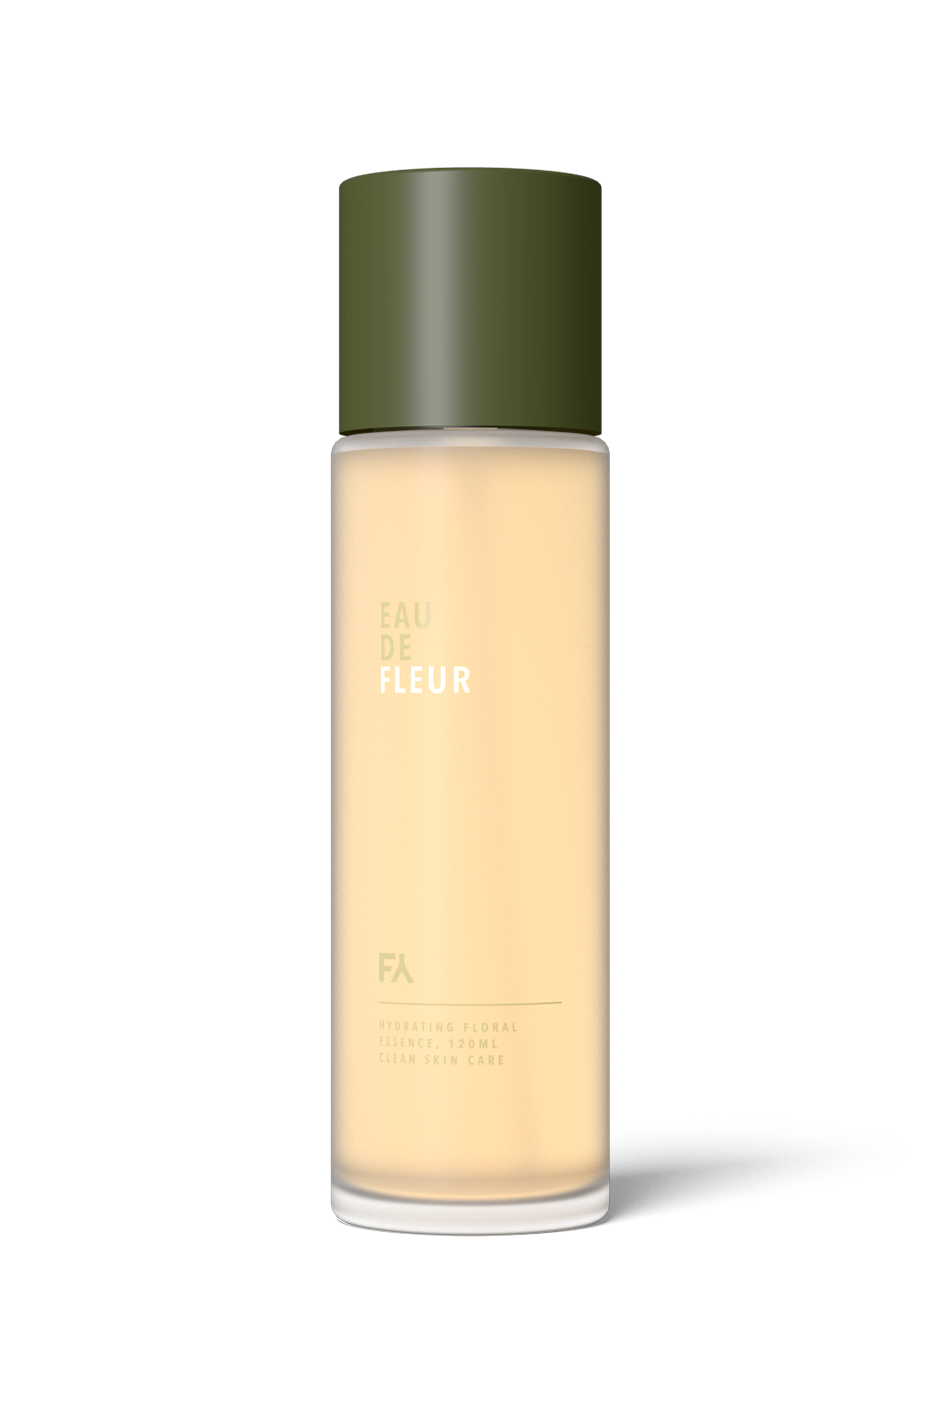 Product image of the Eau de Fleur Hydrating Floral Essence by Fields of Yarrow on transparent background